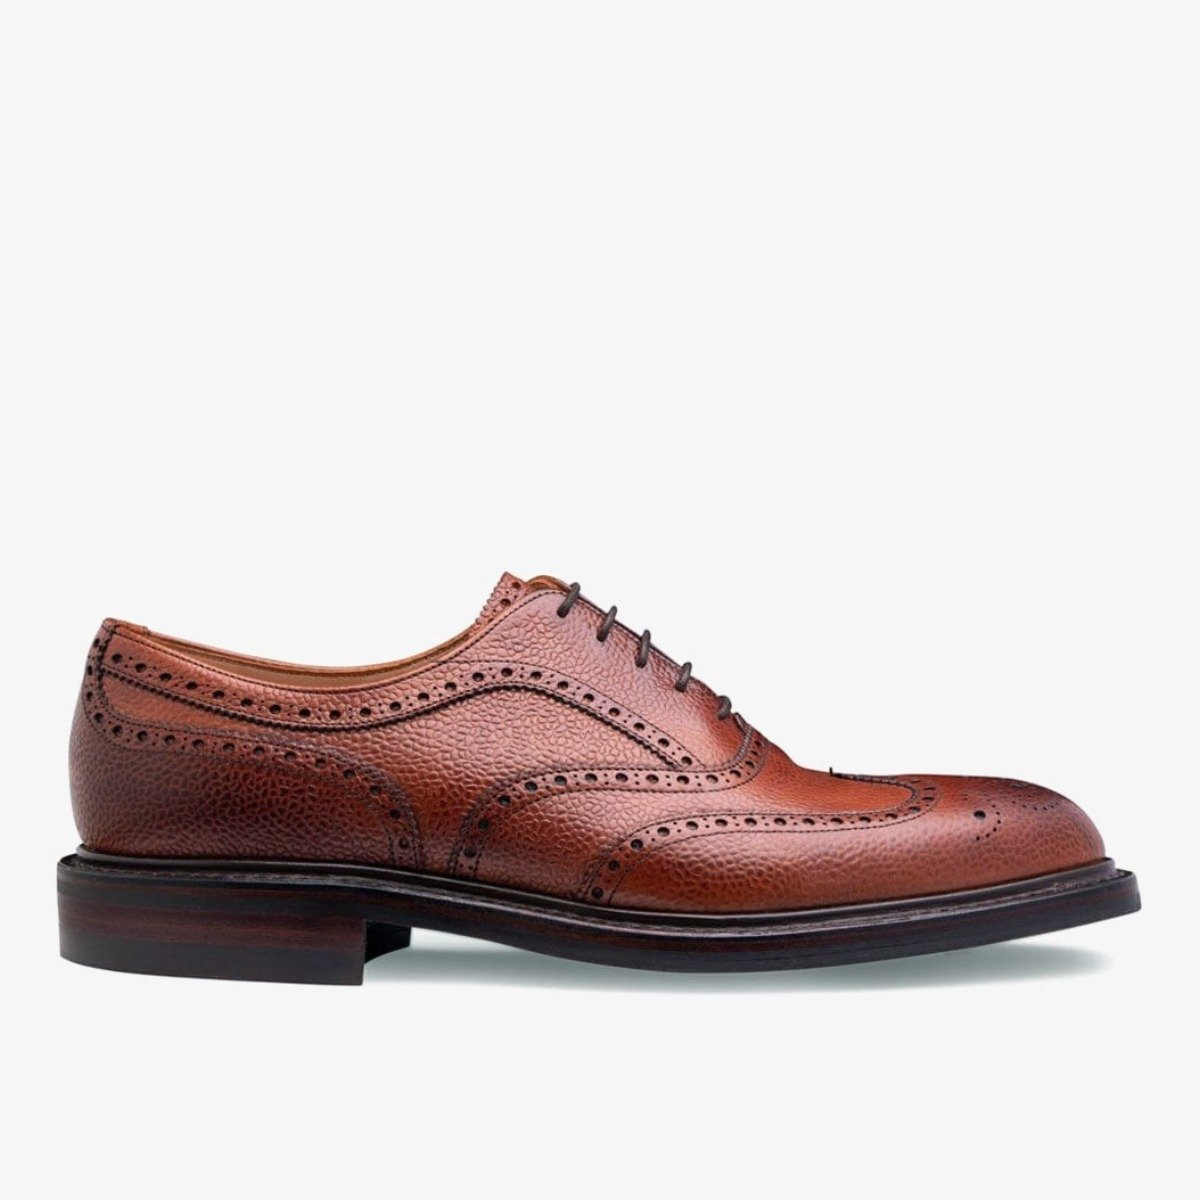 Cheaney Hythe II mahogany brogue oxford shoes